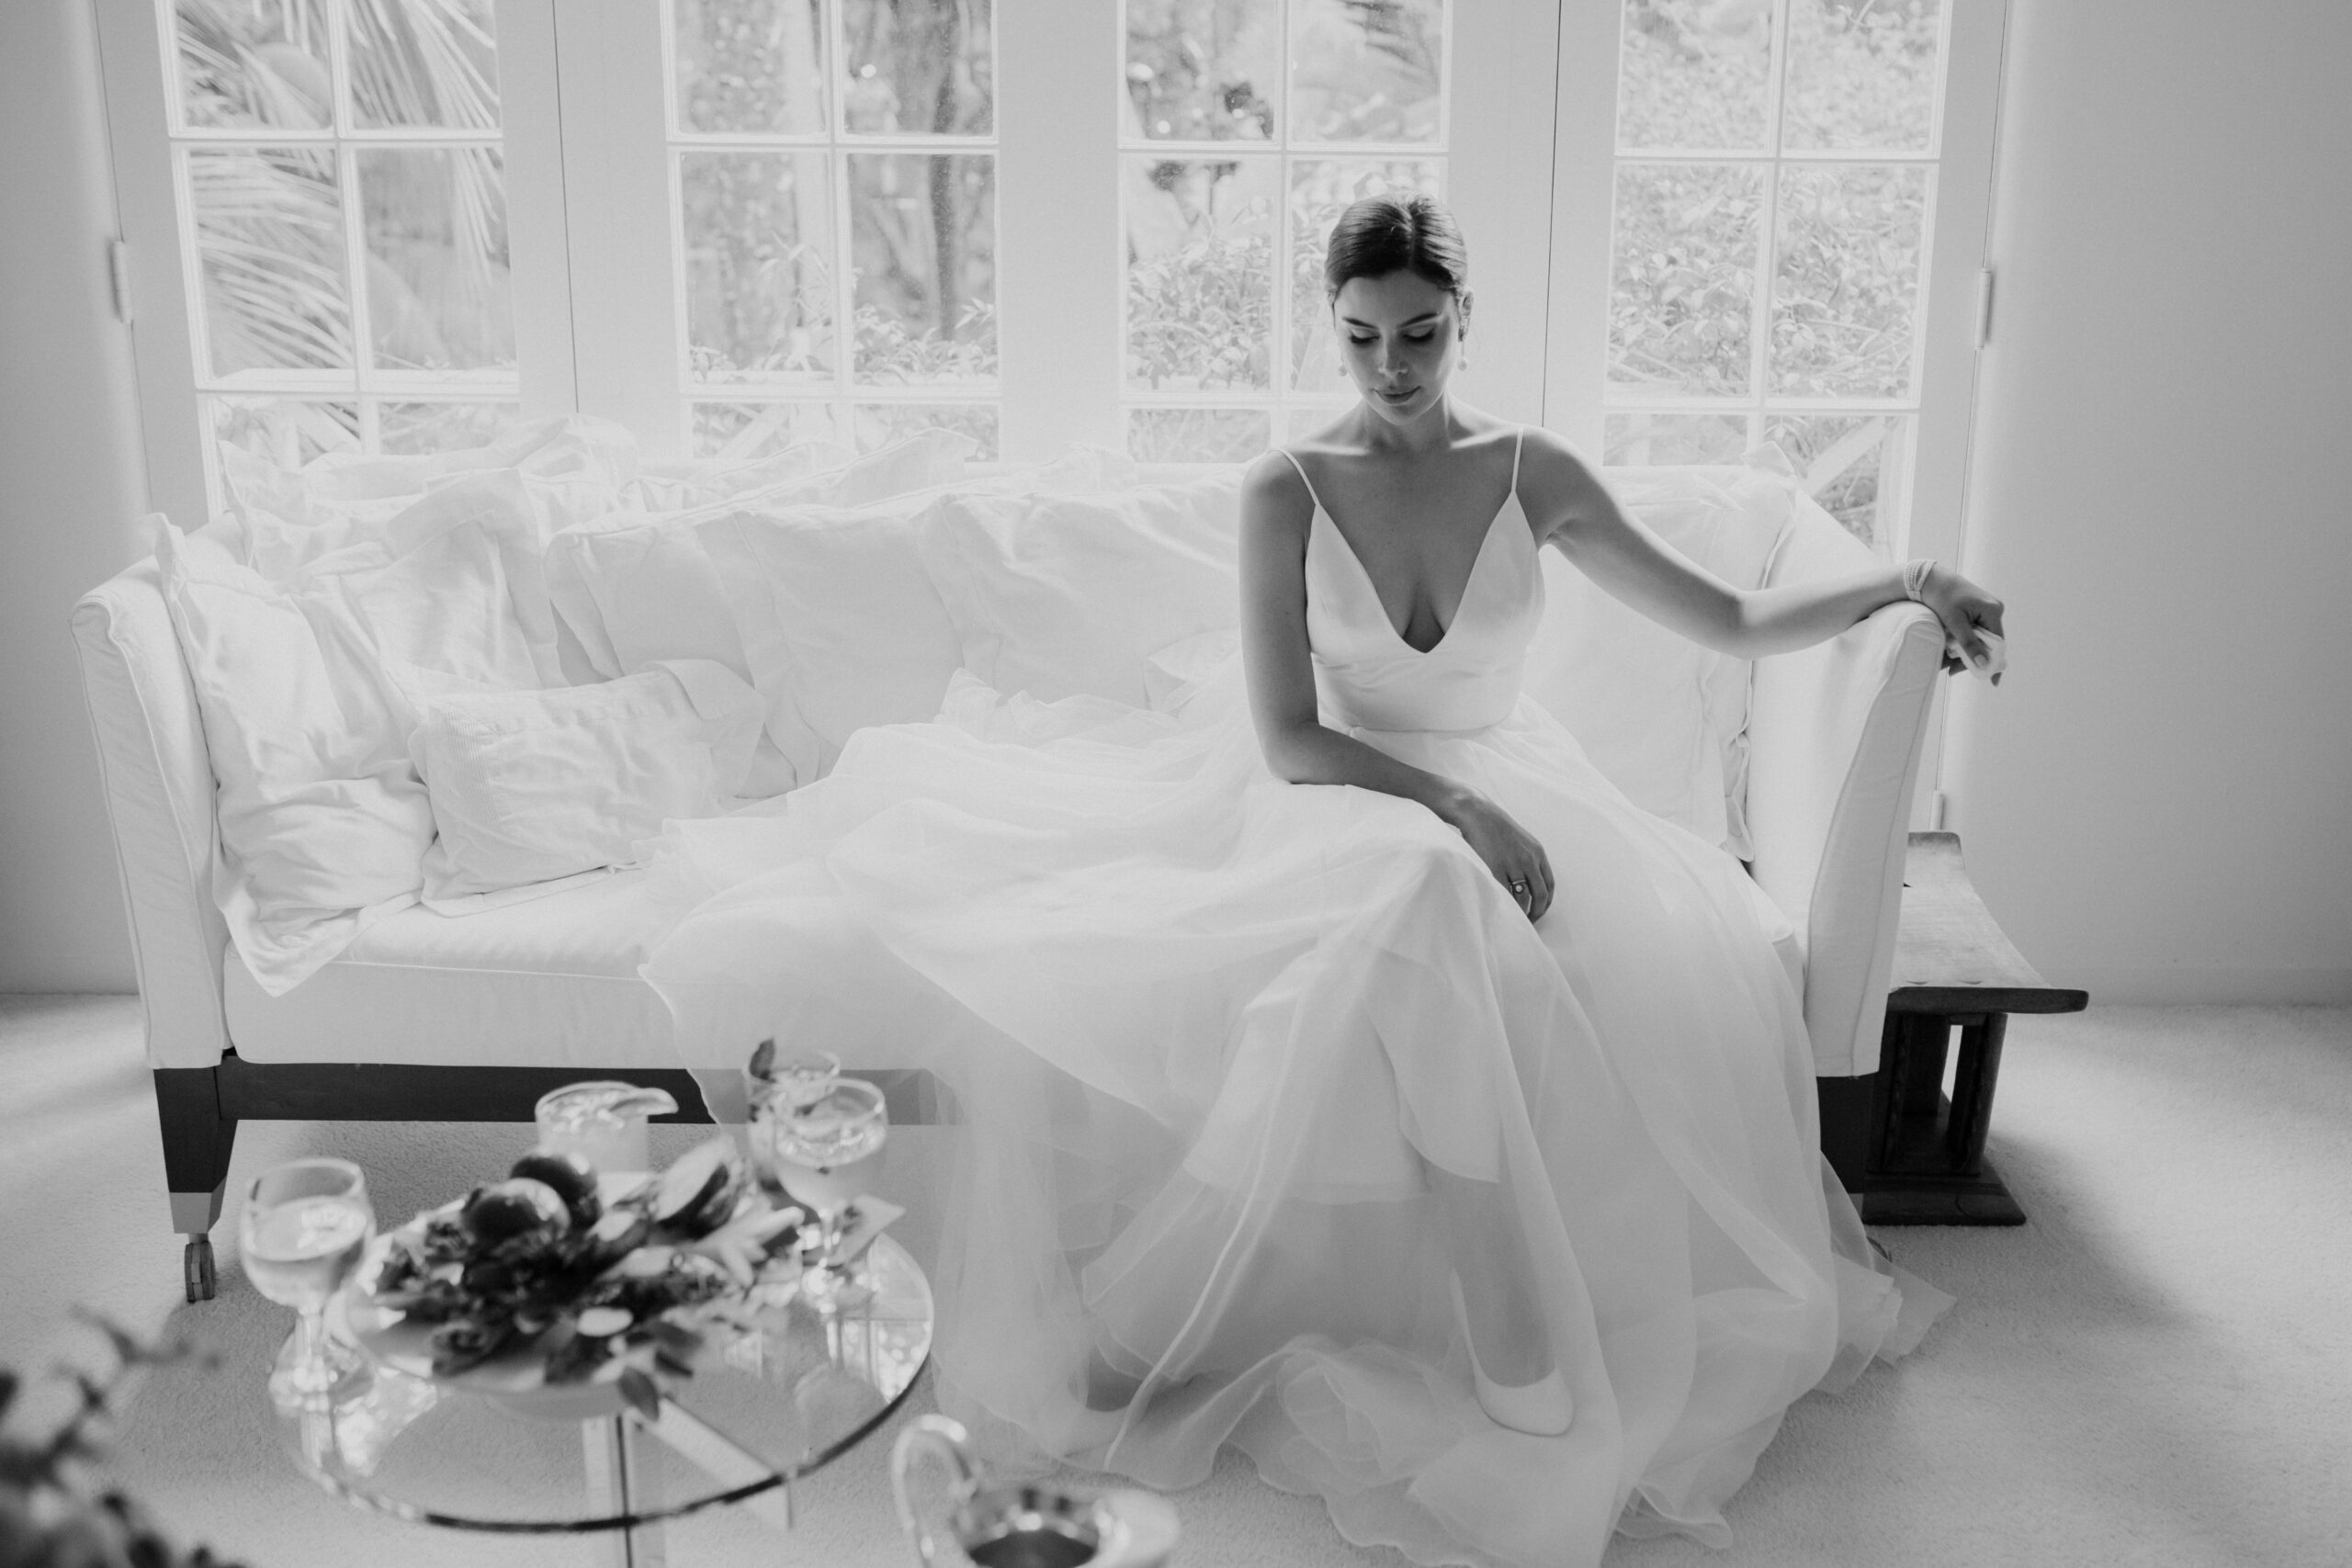 bride poses on a couch with sunlight coming through the windows